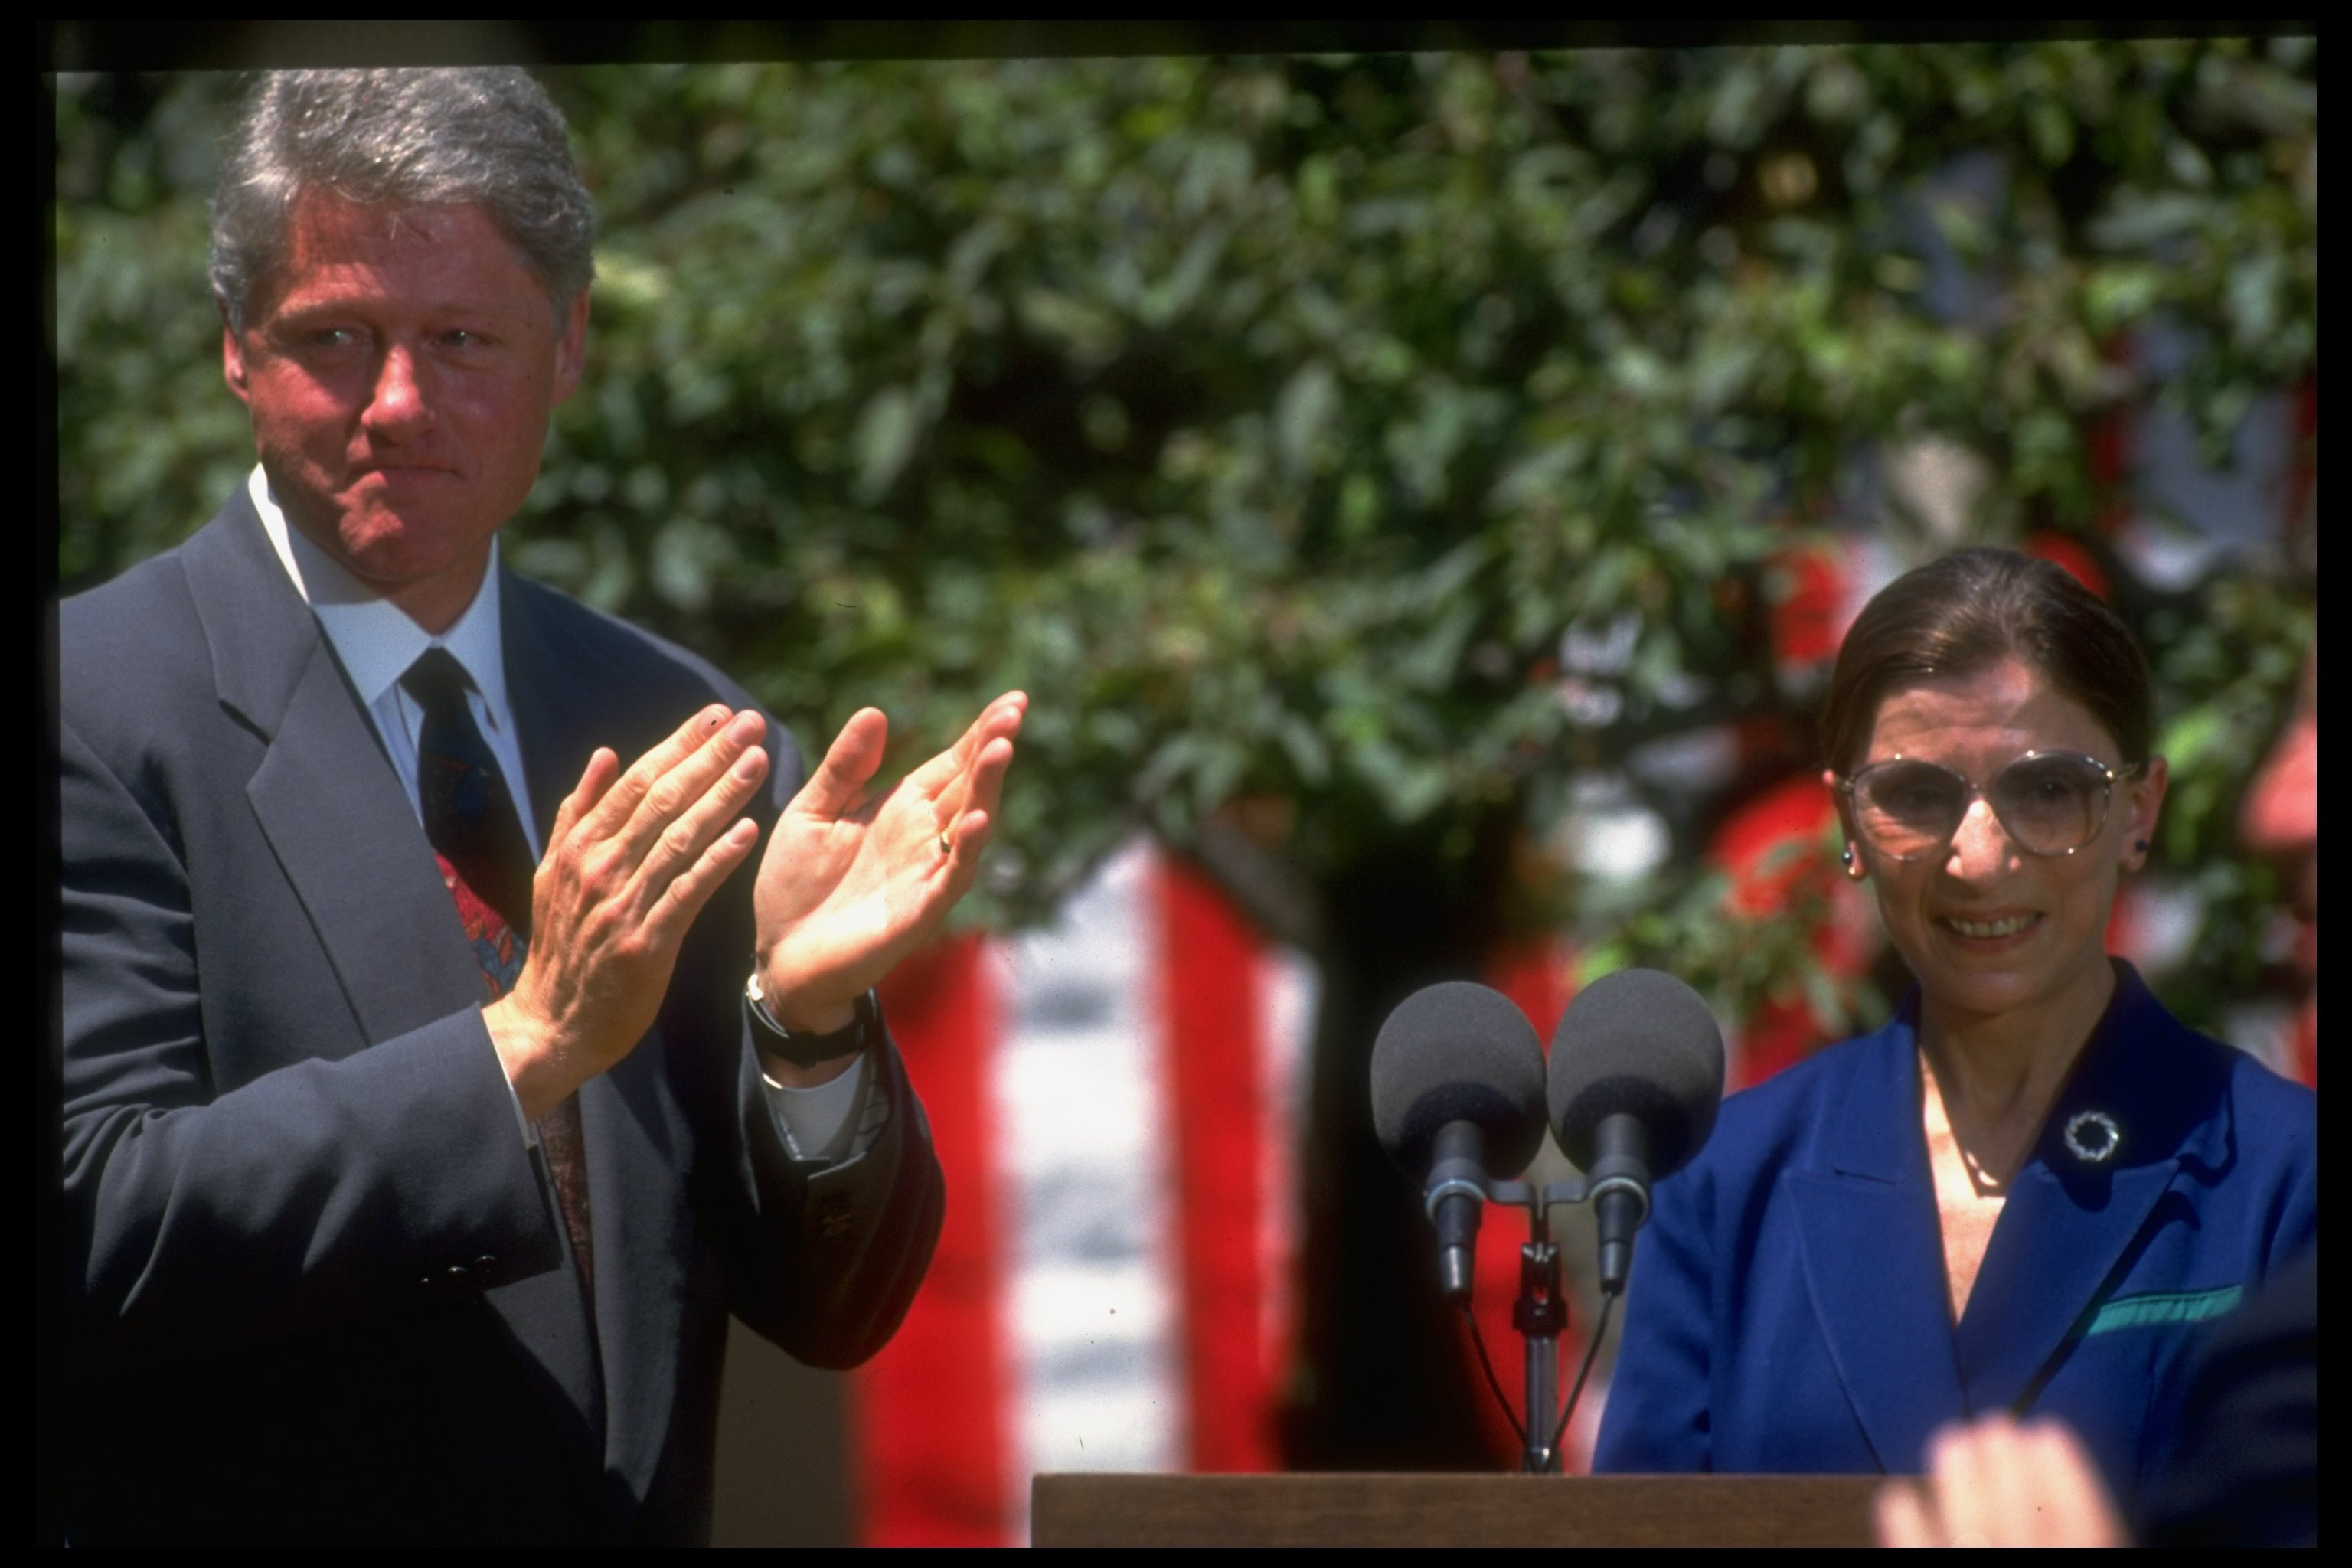 Former United States President Bill Clinton applauding Judge Ruth Bader Ginsburg after Supreme Court nominee's acceptance speech at the White House Rose Garden in Washington D.C. | Photo: Dirck Halstead/The LIFE Images Collection via Getty Images/Getty Images